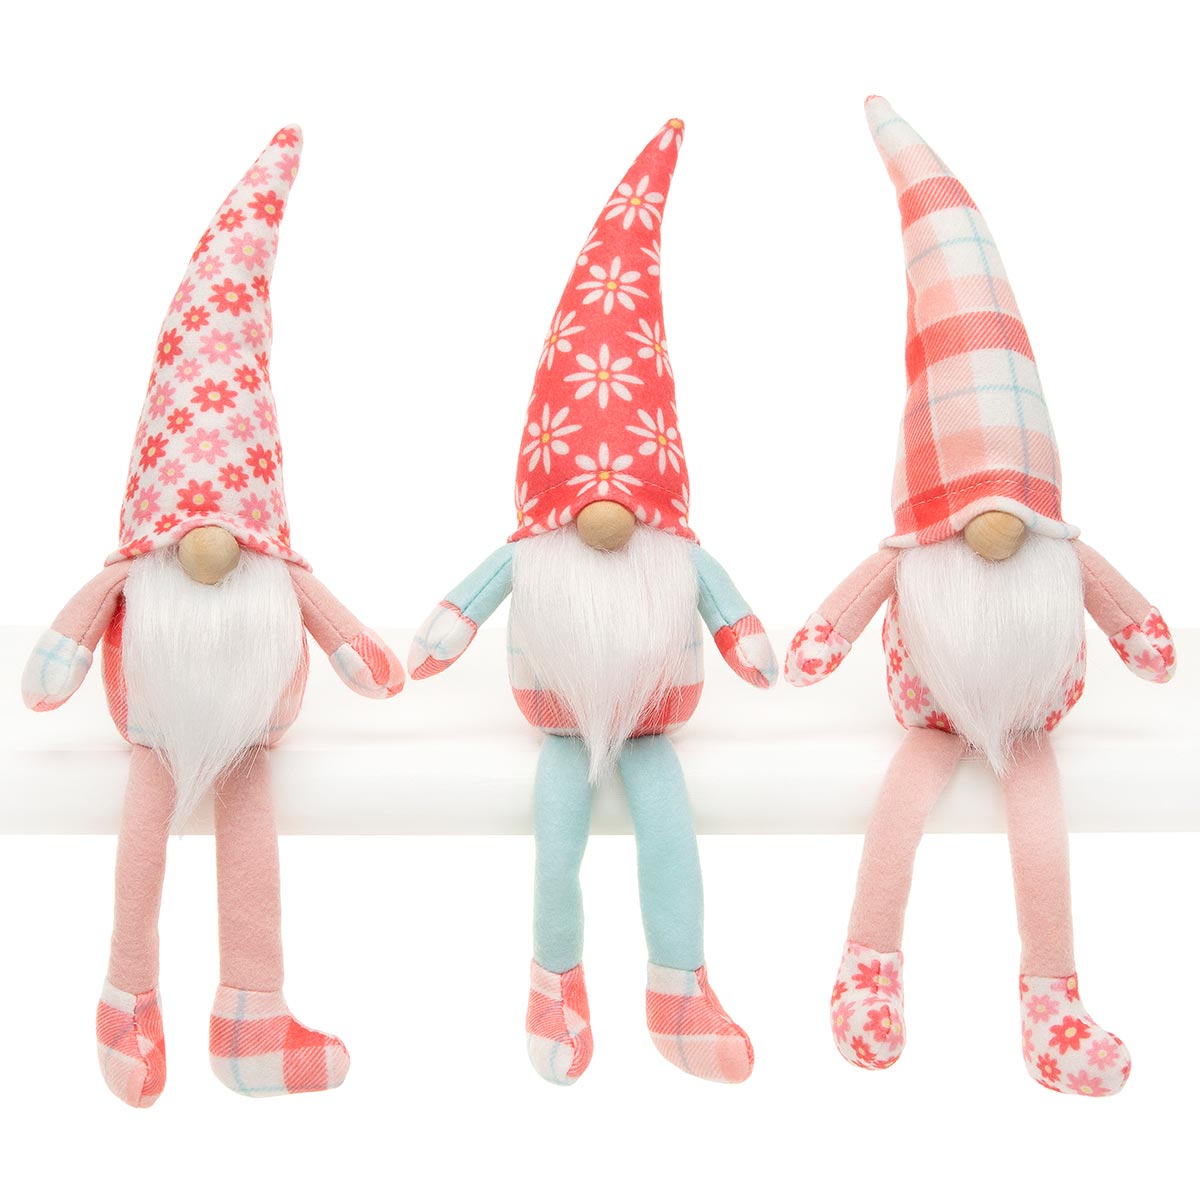 b50 CORAL FAIR GNOMECORAL//WHITE/BLUE WITH WIRED HAT,